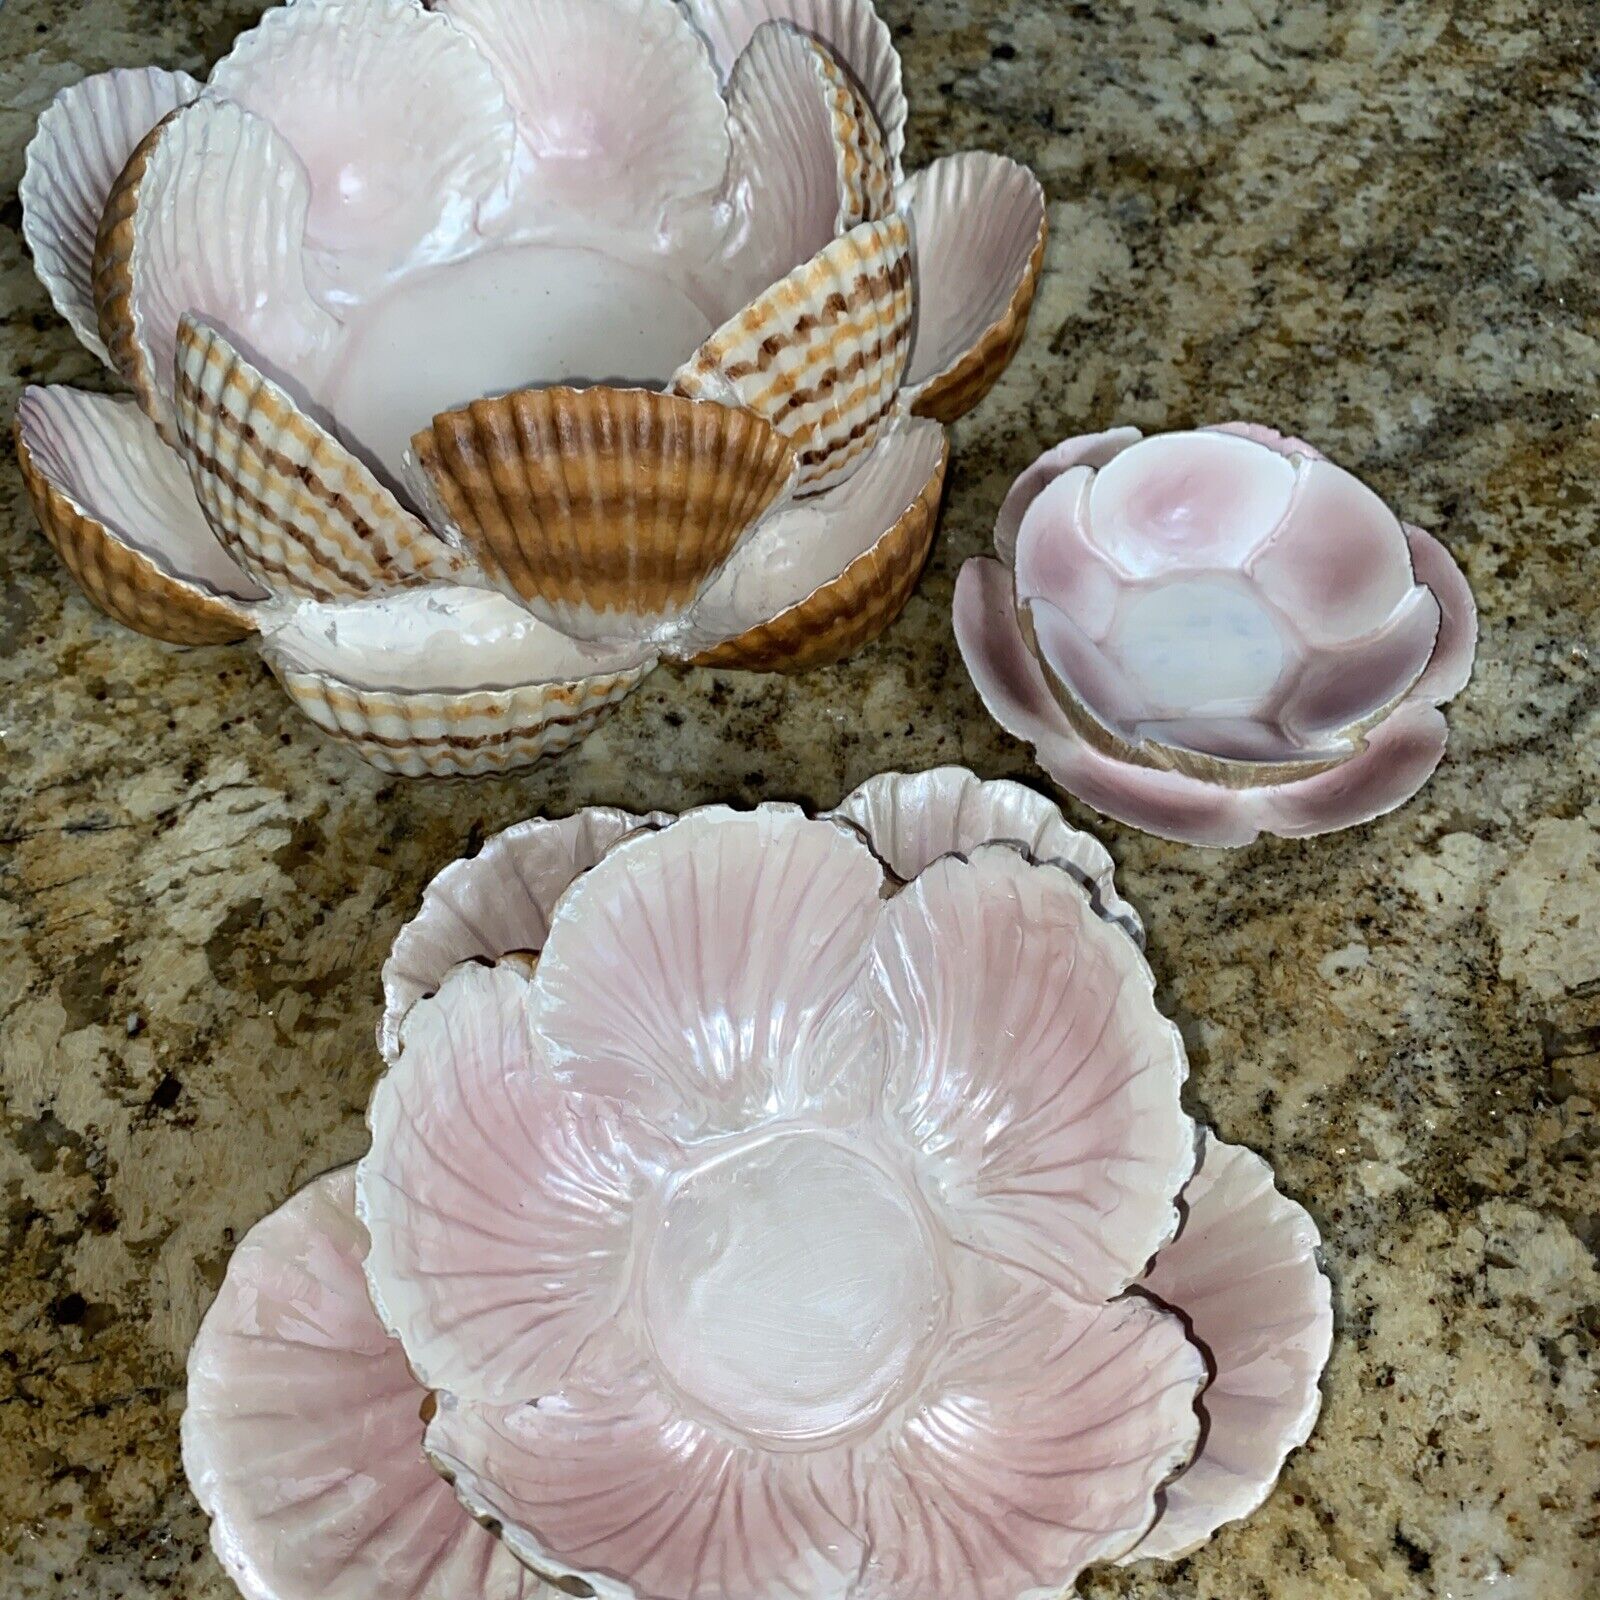 3 Vintage 70’s 80’s Shell Bowls Or Candle Holders Super Cool And Unique